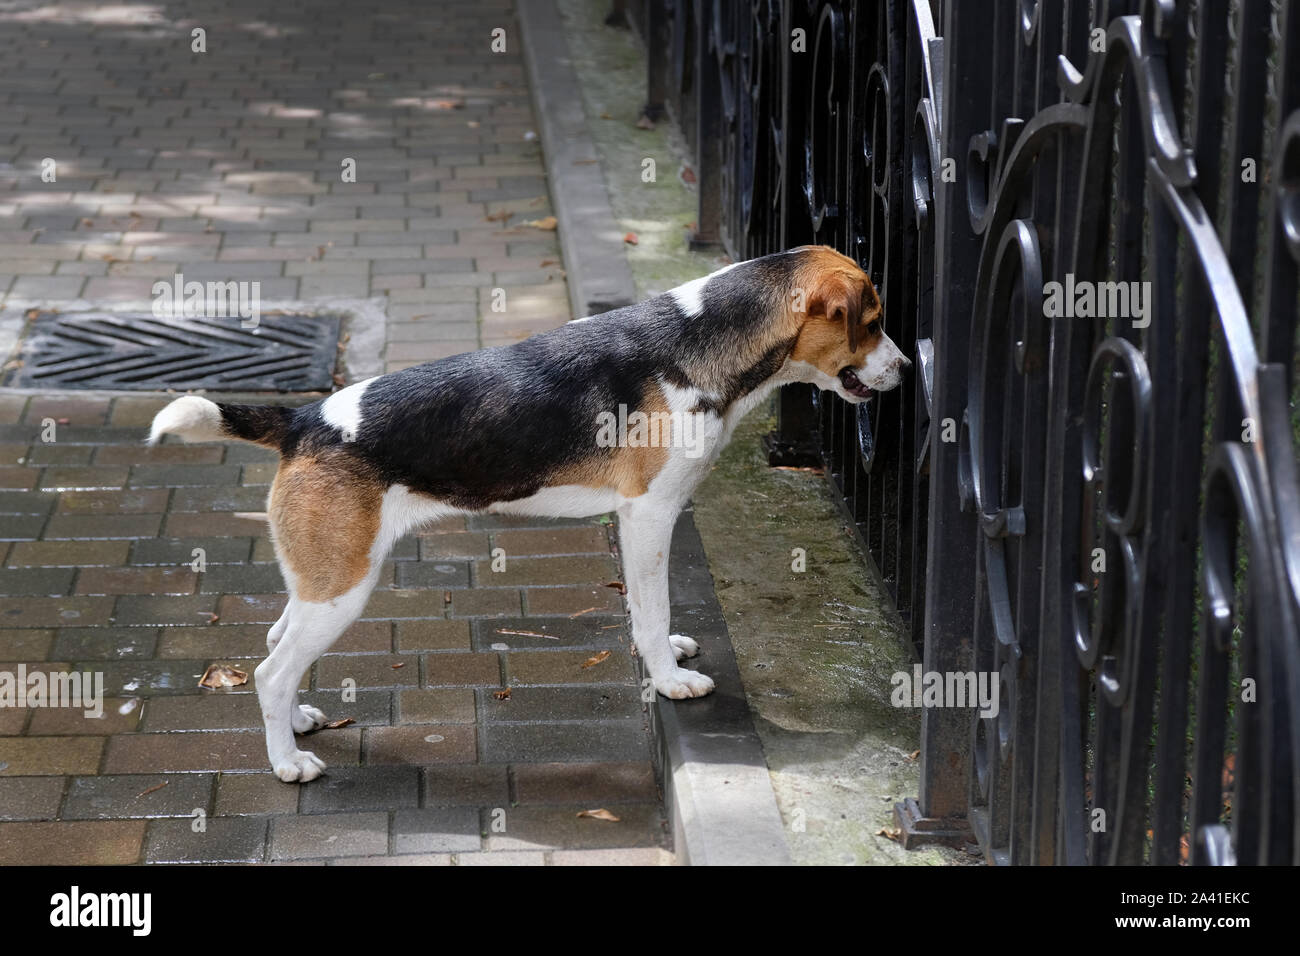 The dog is black with white and brown spots looking at the fence. The dog looks interested in the iron fence, watching what is happening behind him. Stock Photo